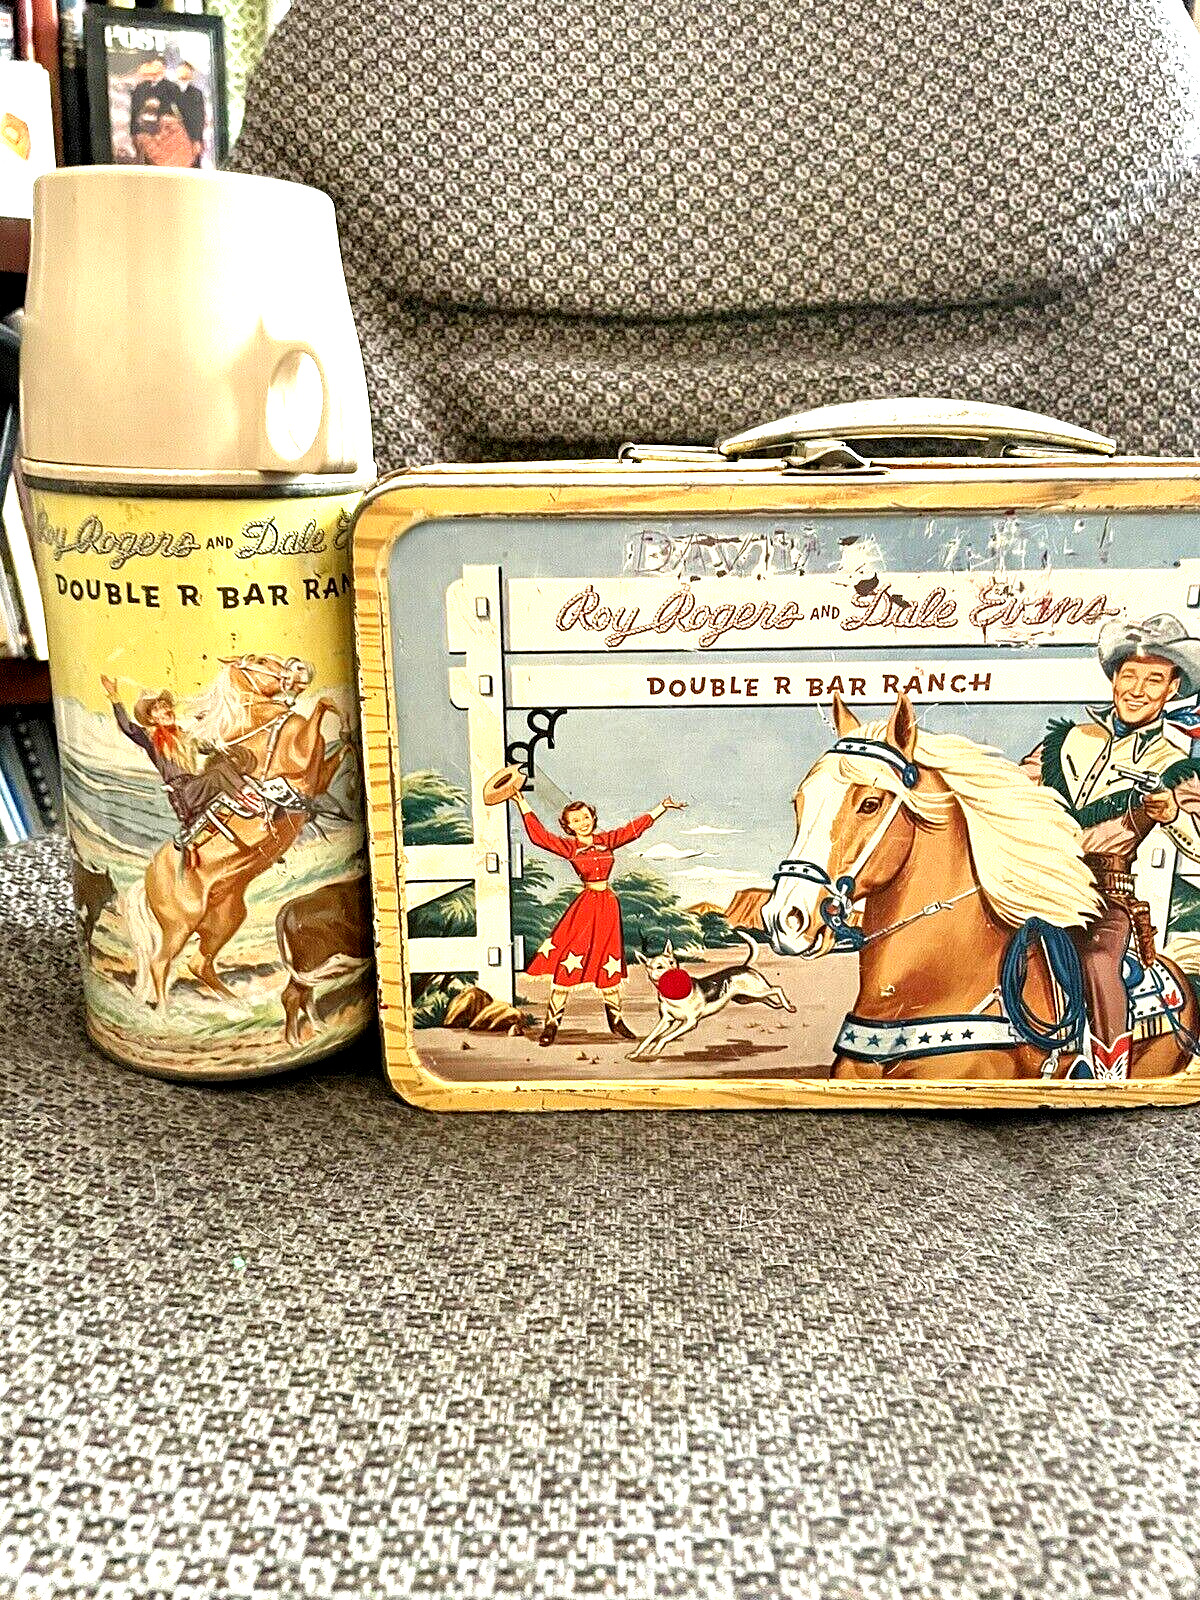 Vintage Roy Rogers And Dale Evans Double T Bar Ranch Lunchbox Thermos 1950s